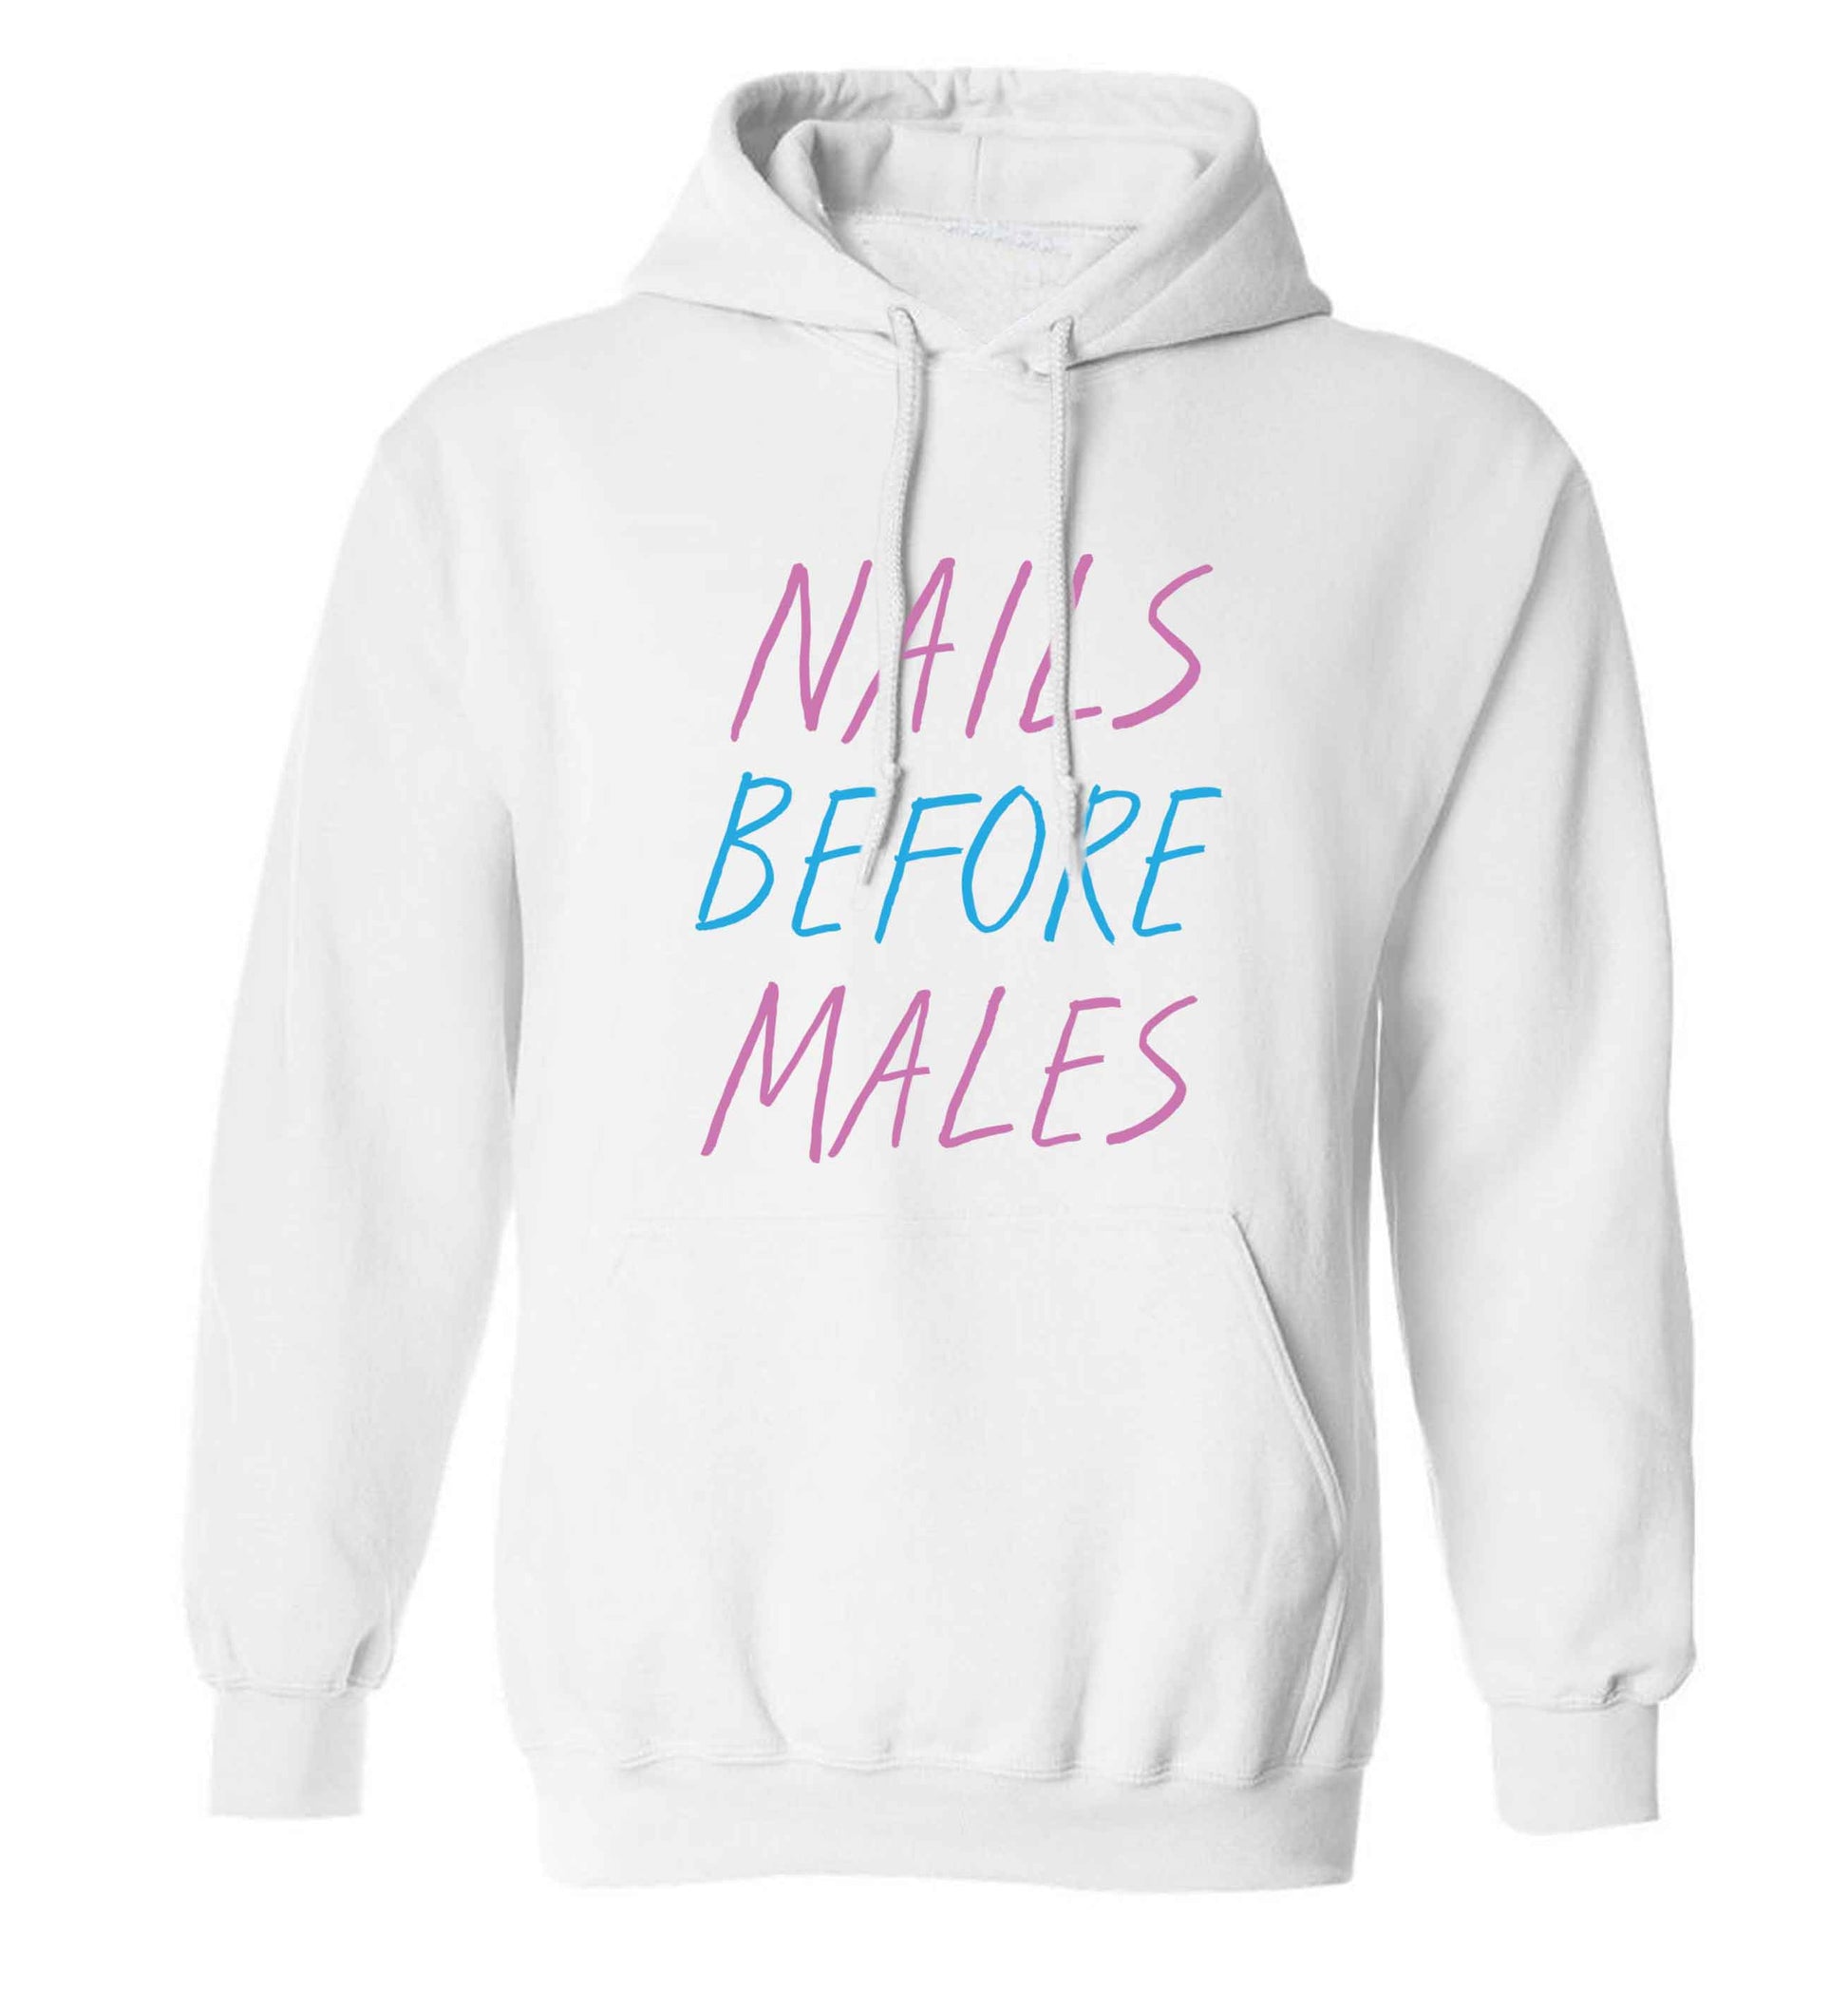 Nails before males adults unisex white hoodie 2XL